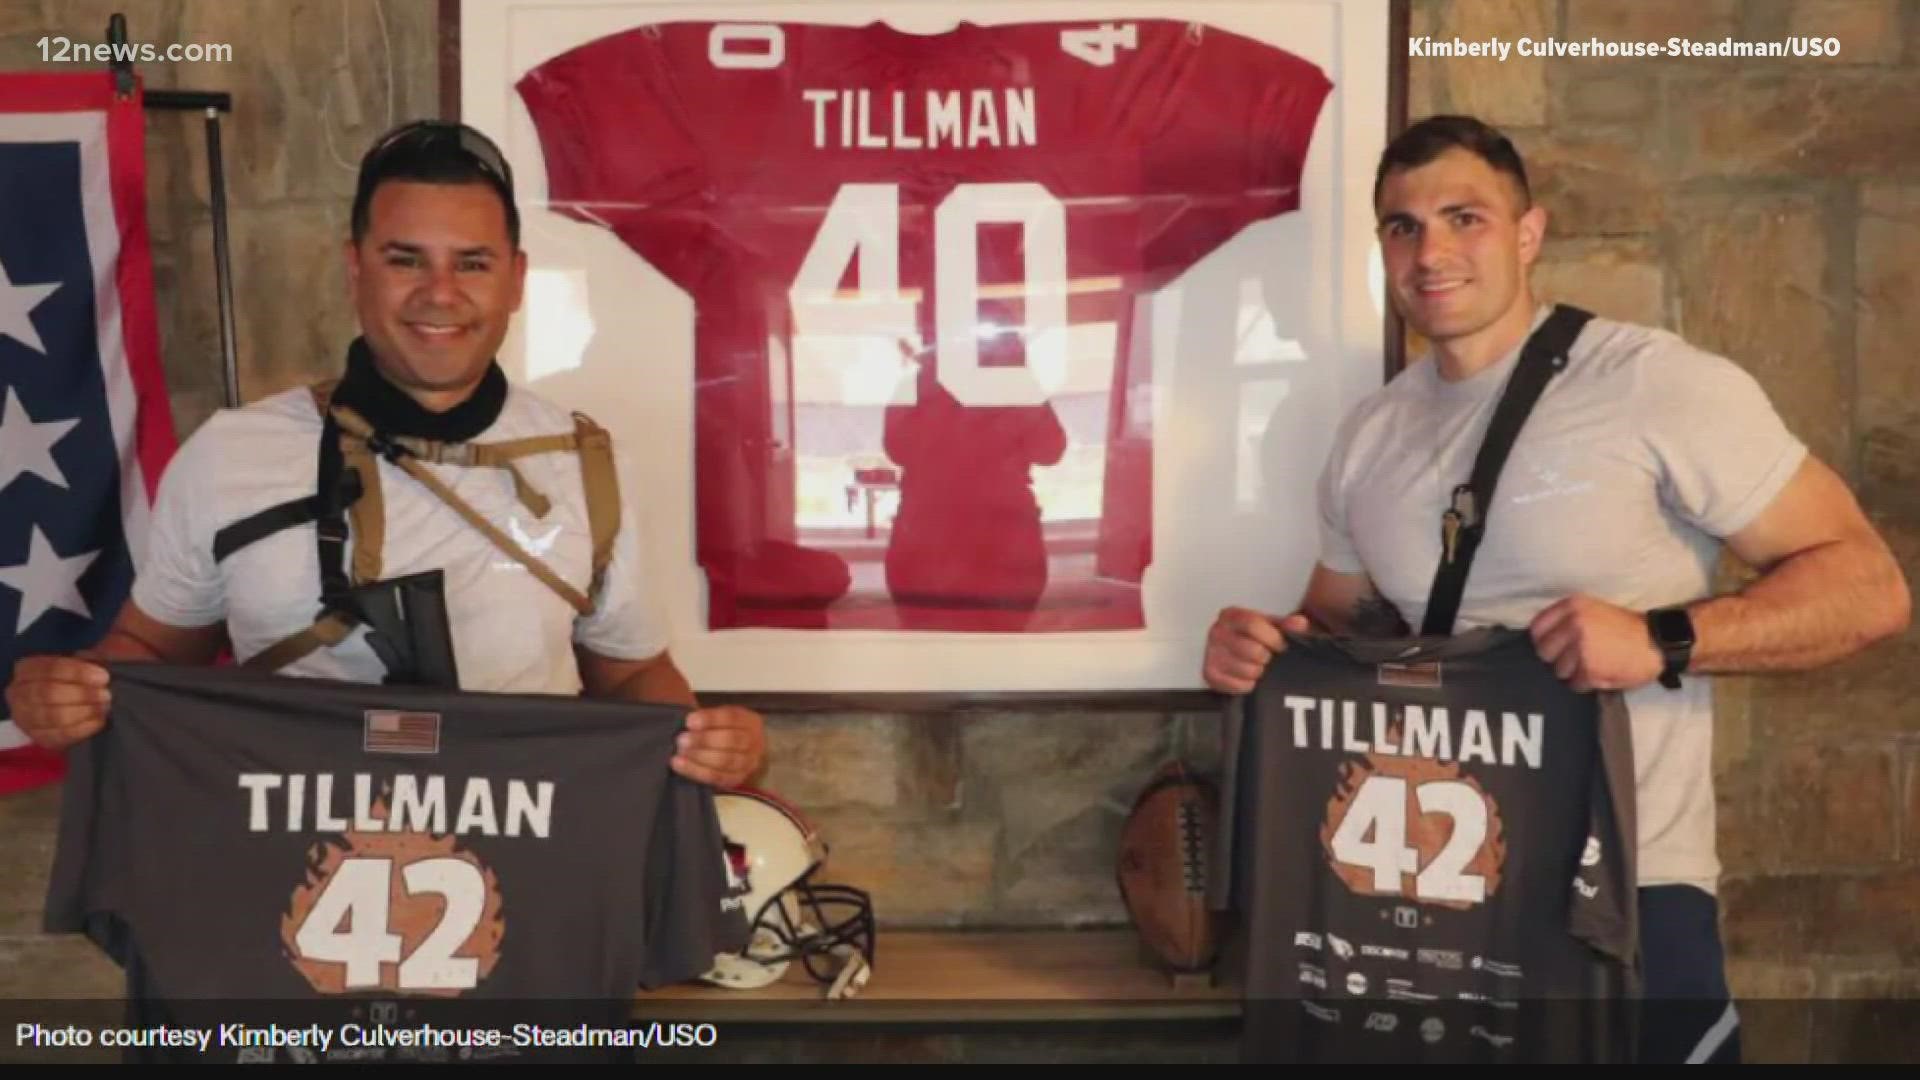 Pat Tillman's Cardinals jersey and other personal items had been displayed in Afghanistan as a memorial for the late football player. But are they still there?